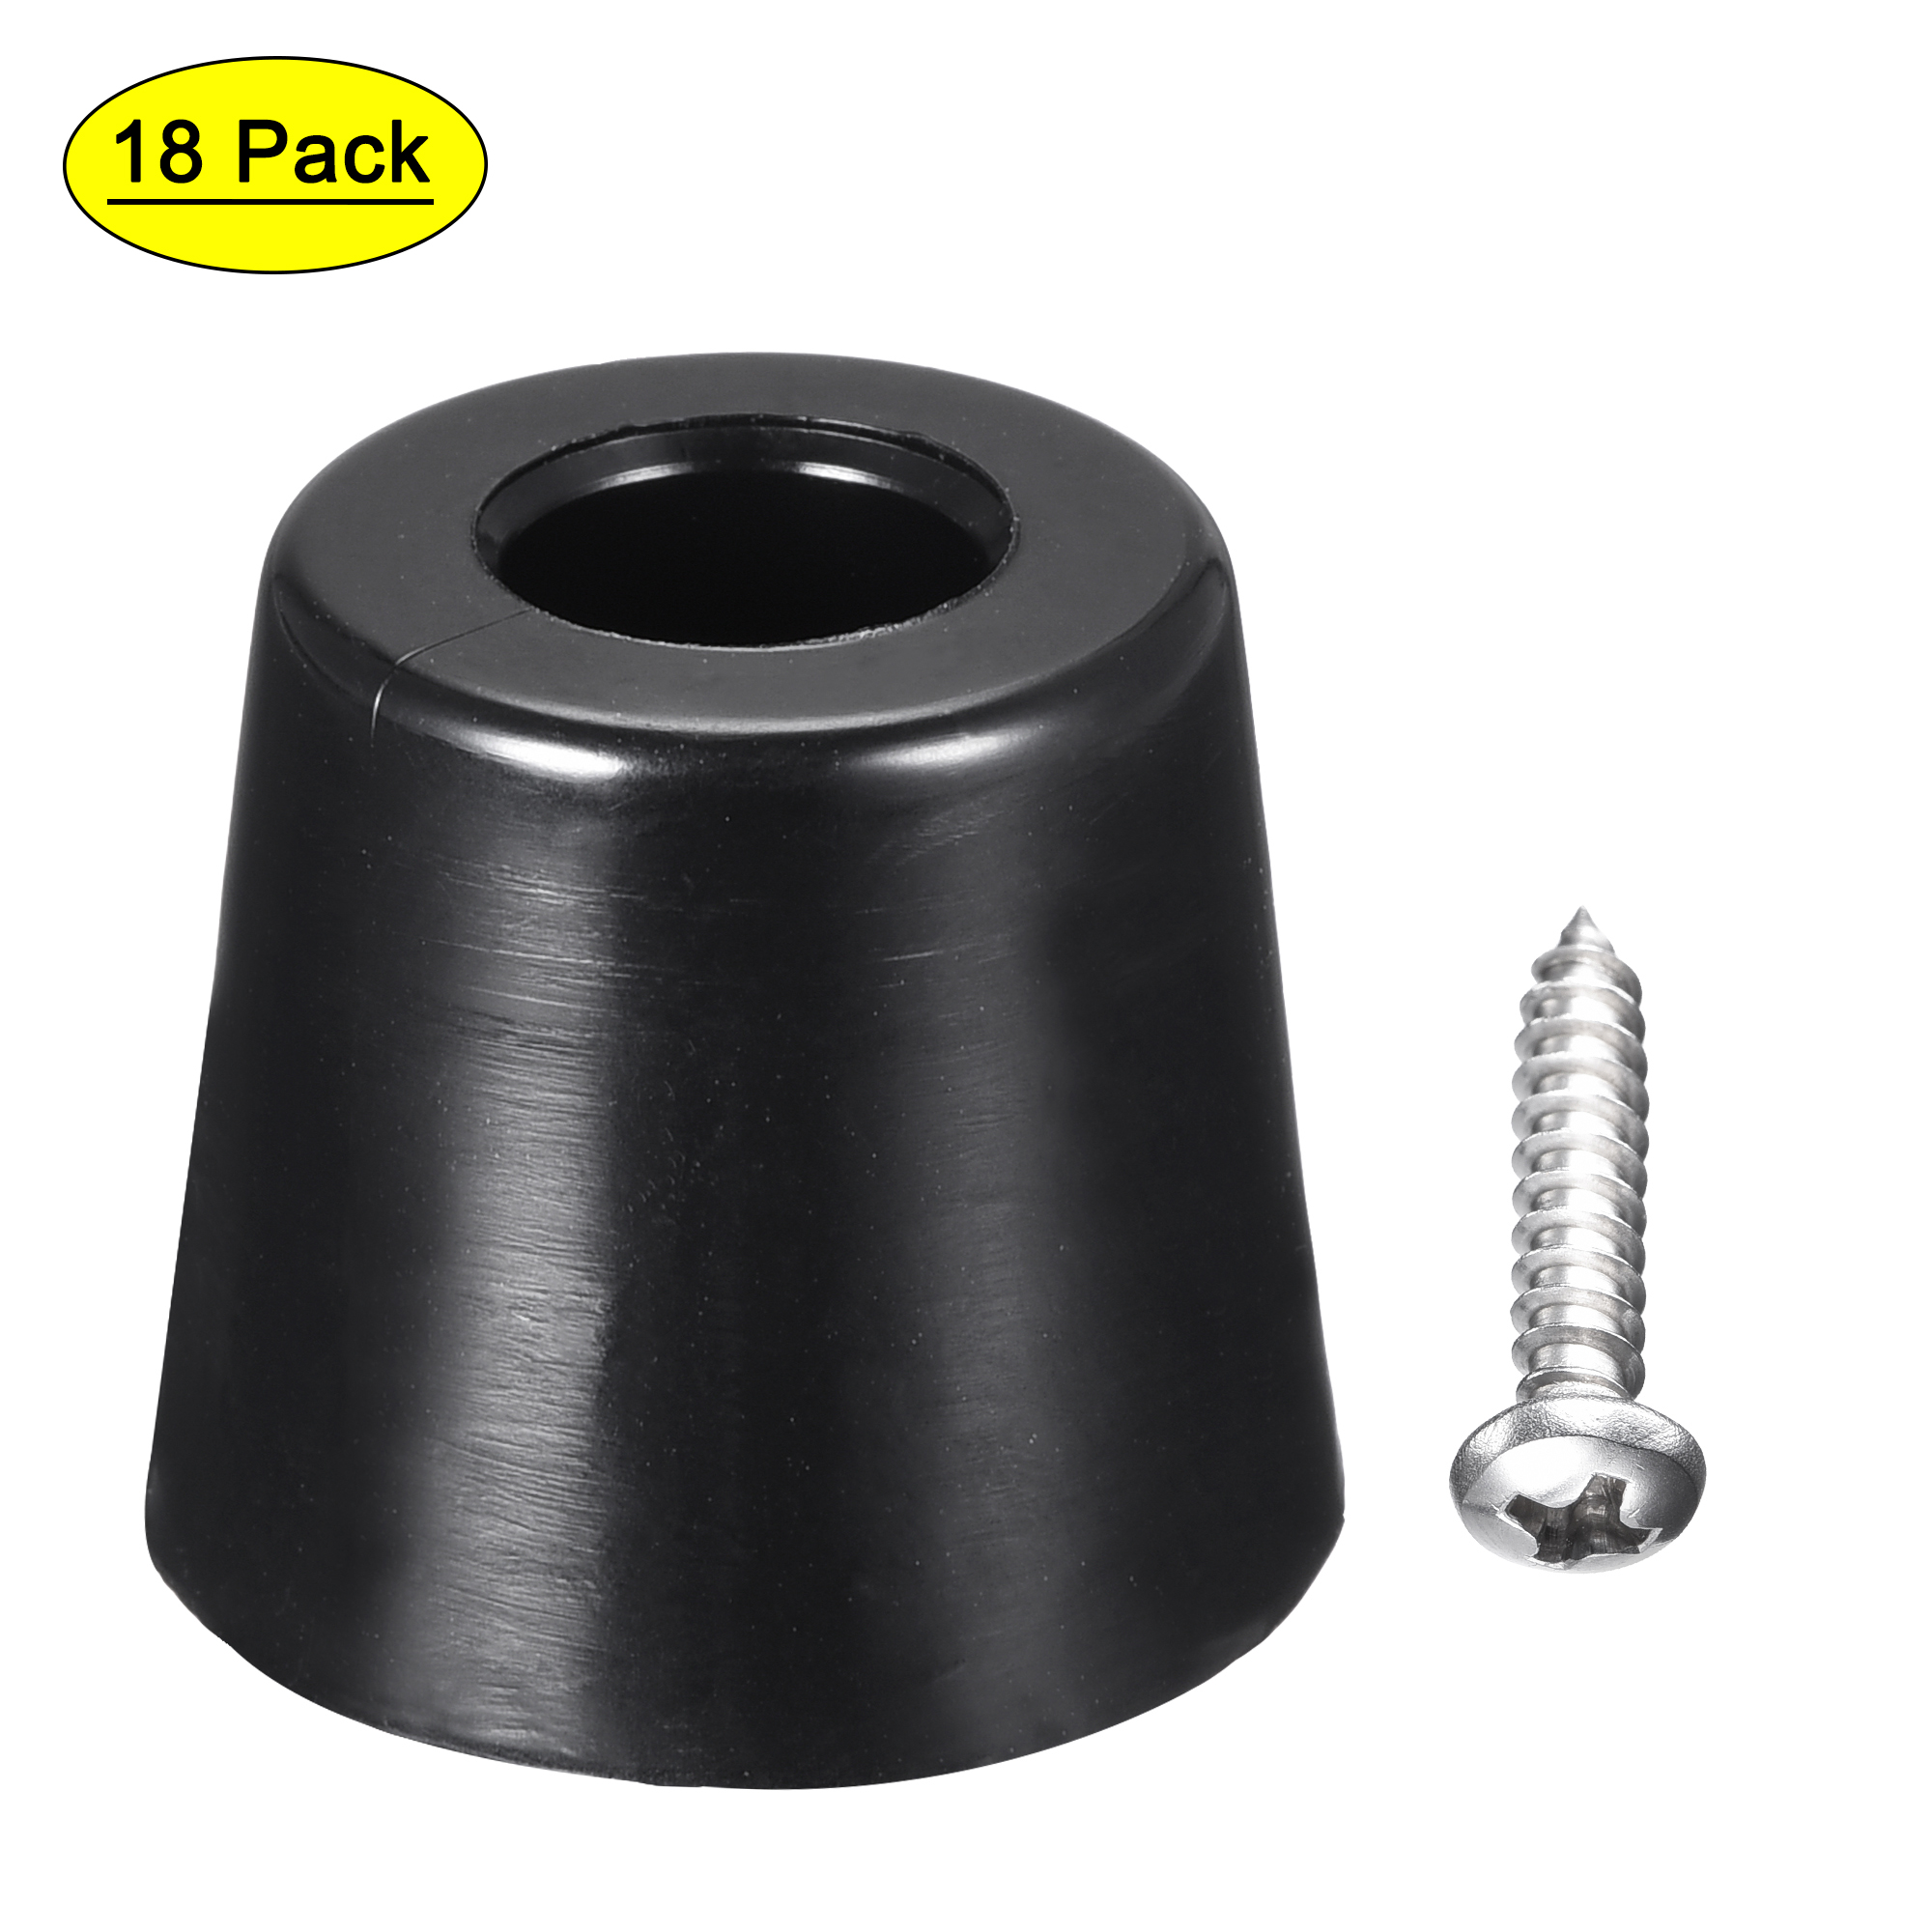 Uxcell 0.75" W x  0.63" H Rubber Bumper Feet, Stainless Steel Screws and Washer 18 Pack - image 1 of 5